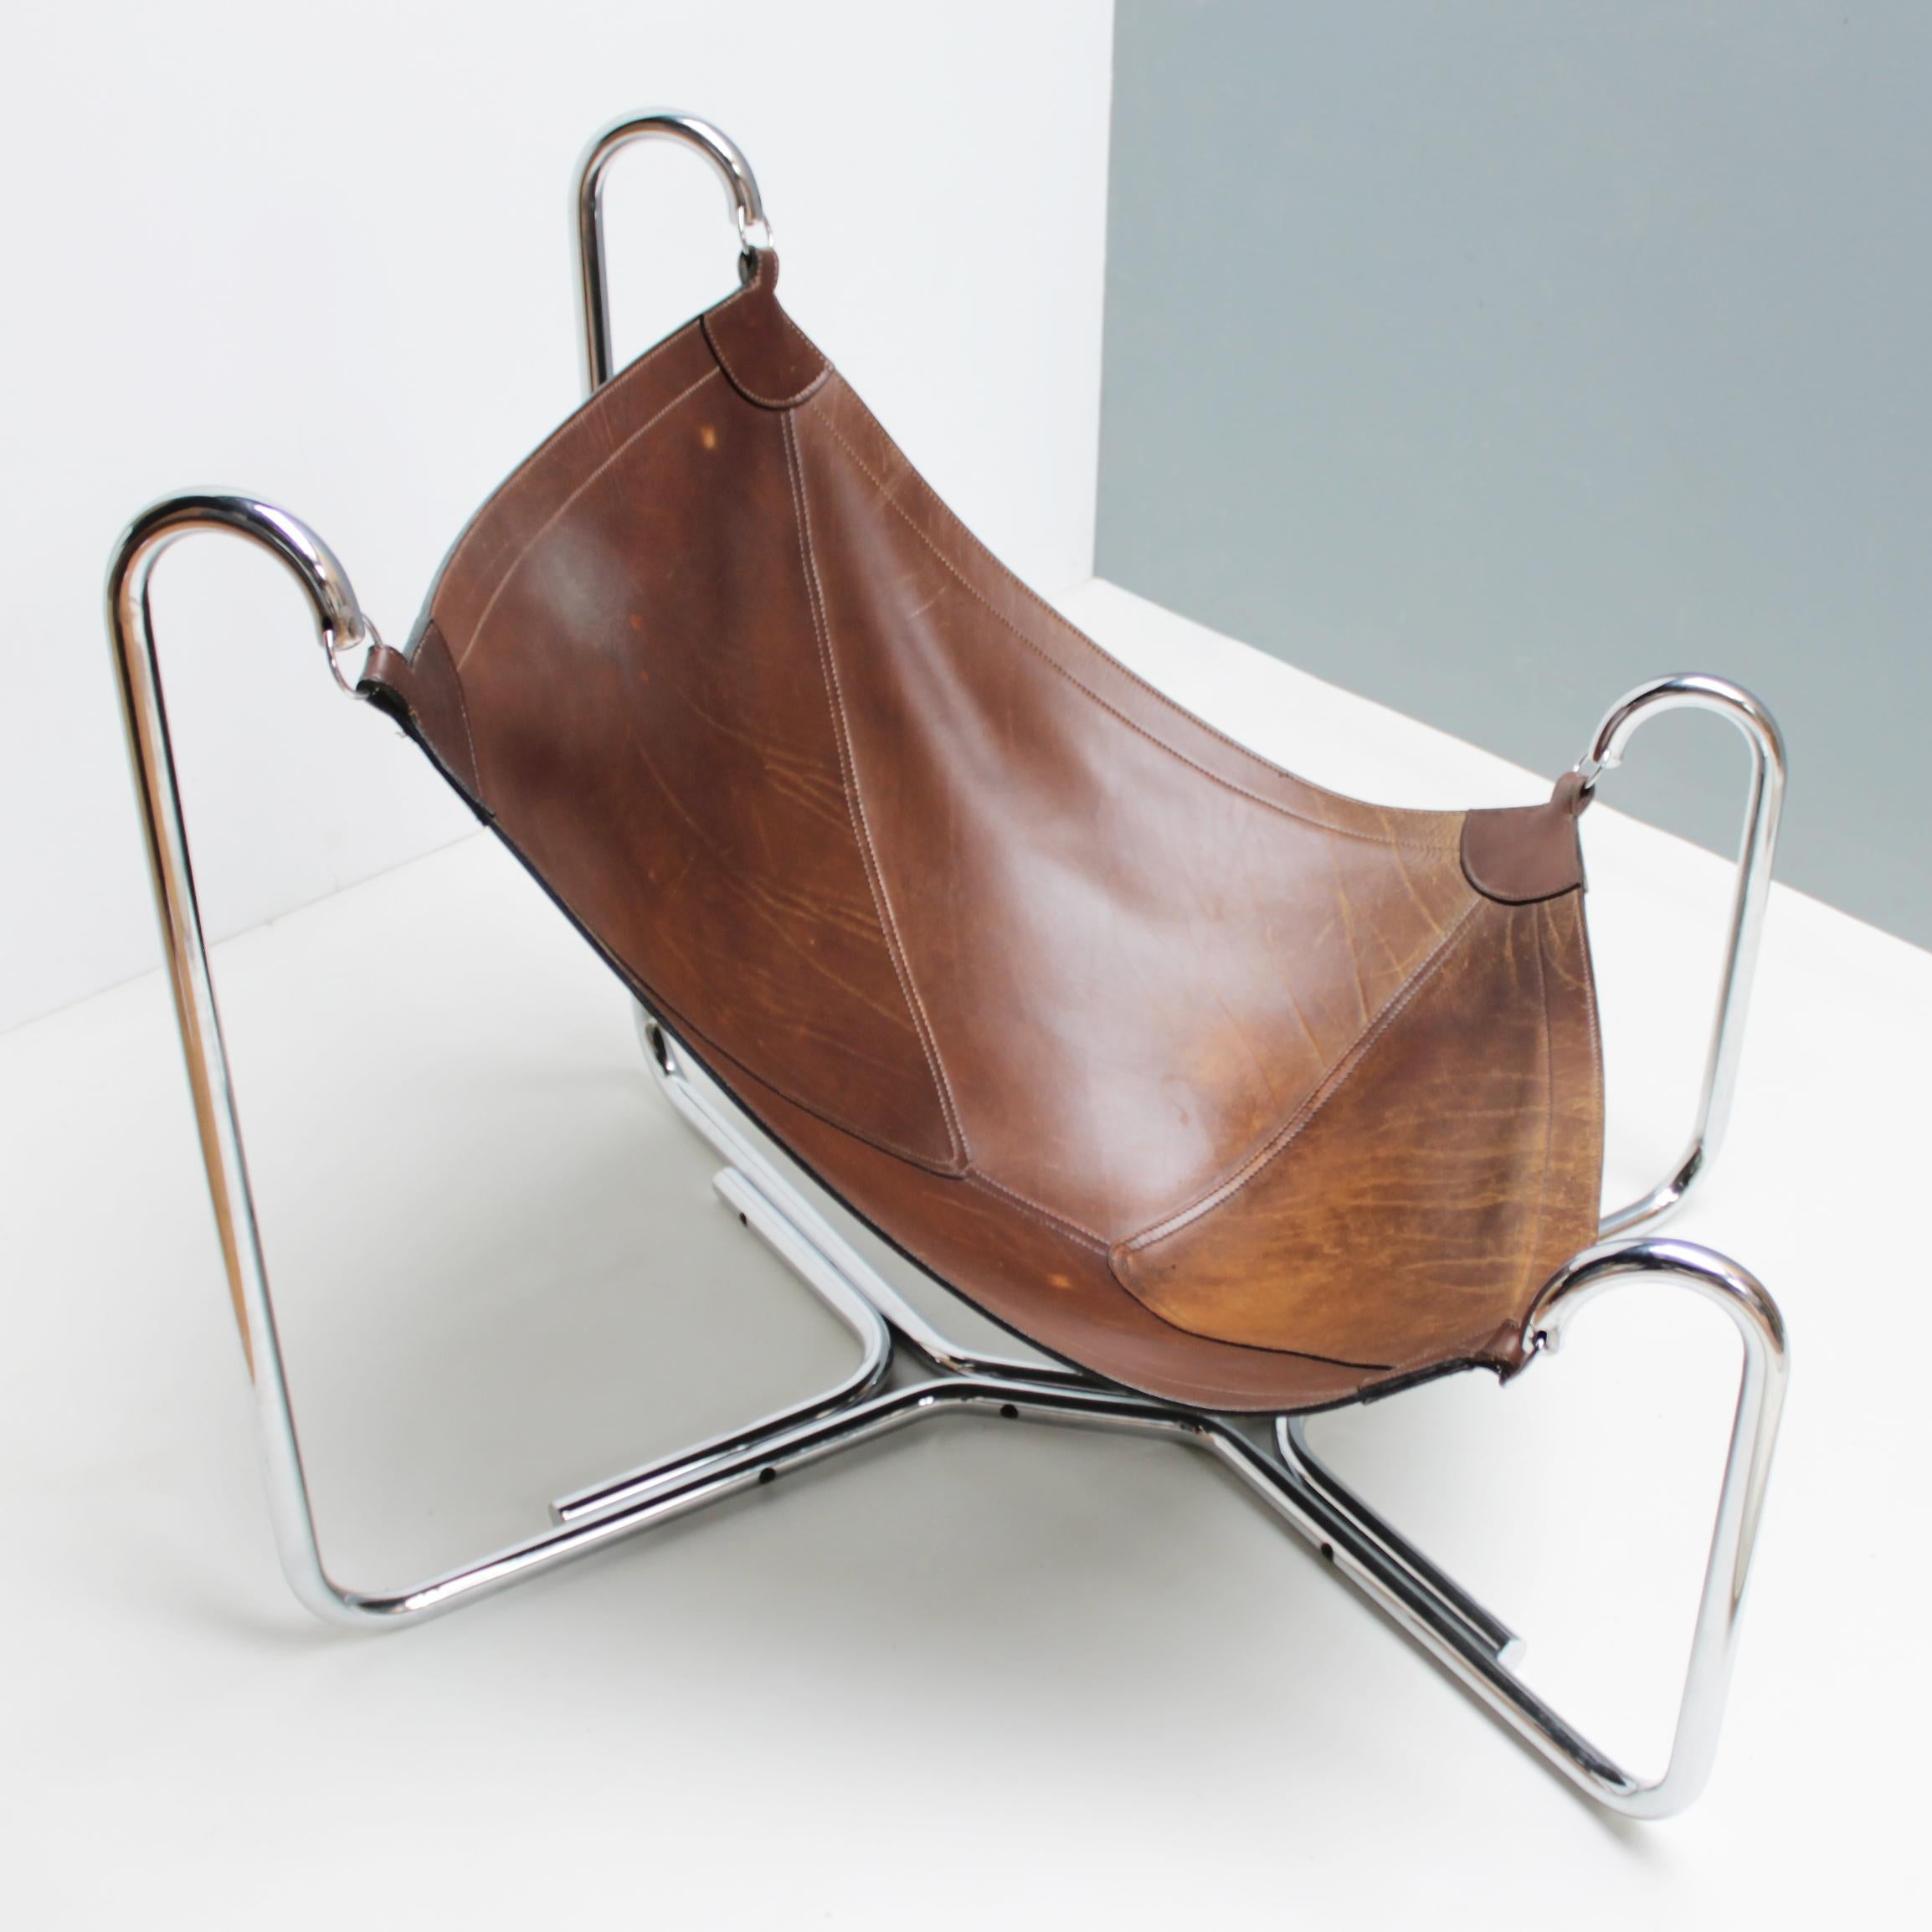 First edition 'Baffo' lounge chair by Ezio Didone and Gianni Pareschi for Gruppo Industriale Busnelli, Italy. Chromed tubular steel frame and saddle-stitched leather seat.
Dimensions: Height 34.4 in. (87.5 cm), width 31.1 in. (79 cm), depth 37.0